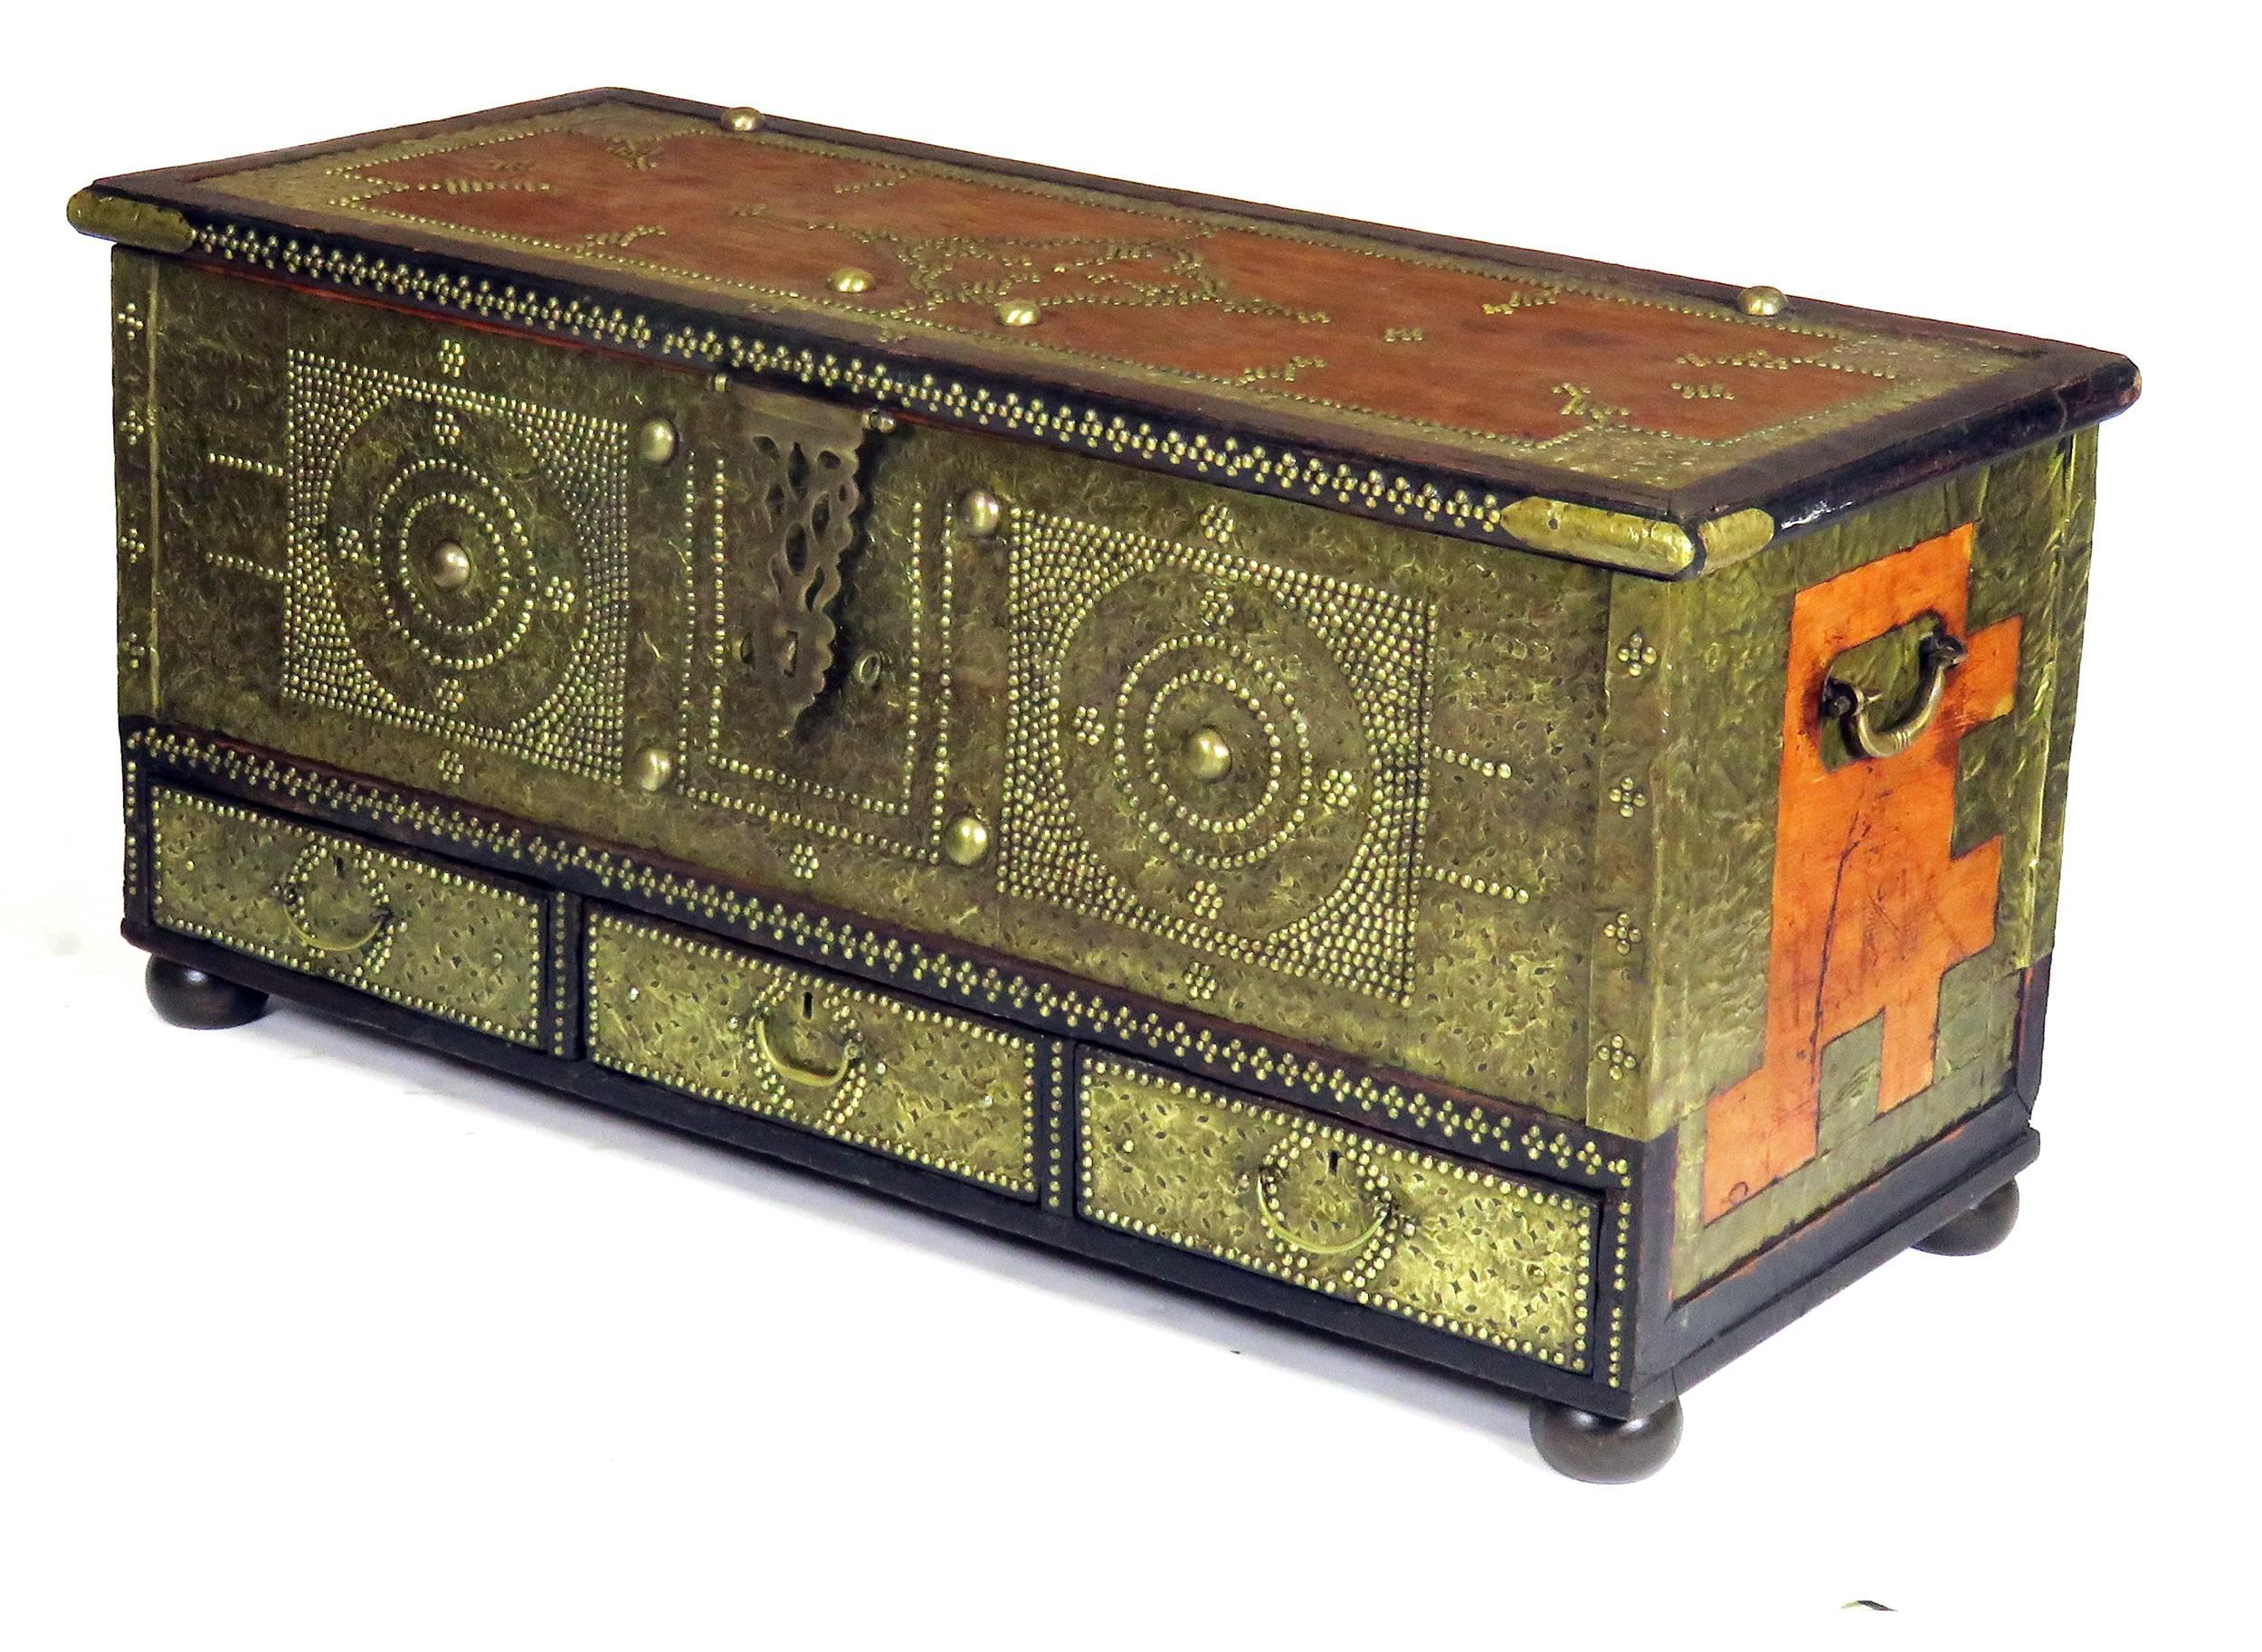 19th century Zanzibar trunk, circa 1850. Covered in decorative brass and metalwork over wood. Great storage with three drawers.